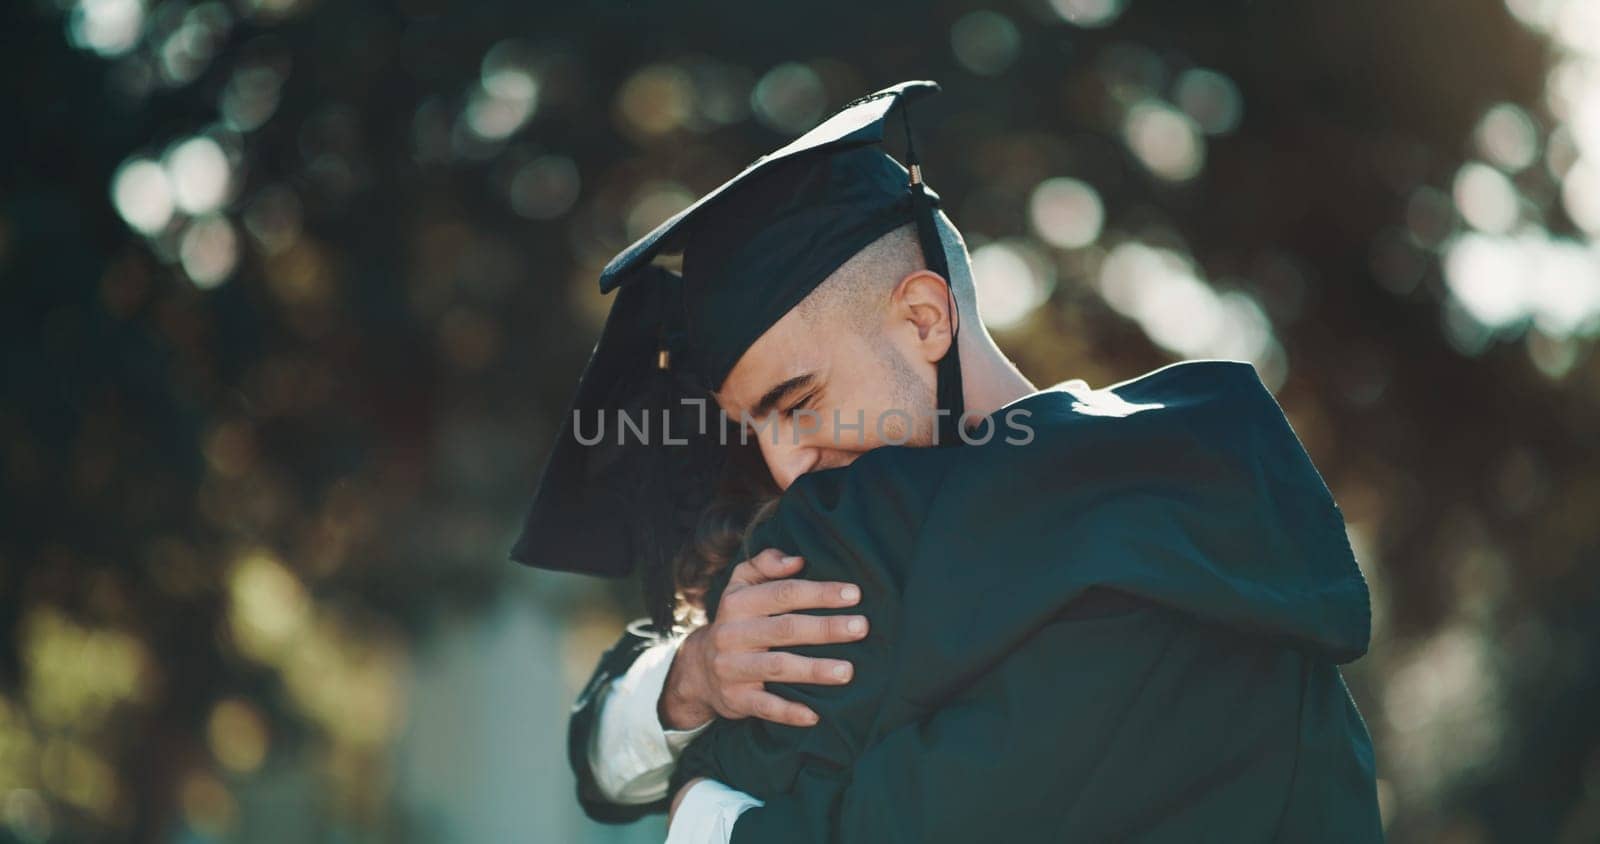 Hug, graduation and education with friends in college for celebration, scholarship and congratulations. Study, university and success with students hugging on campus for achievement, school and event.